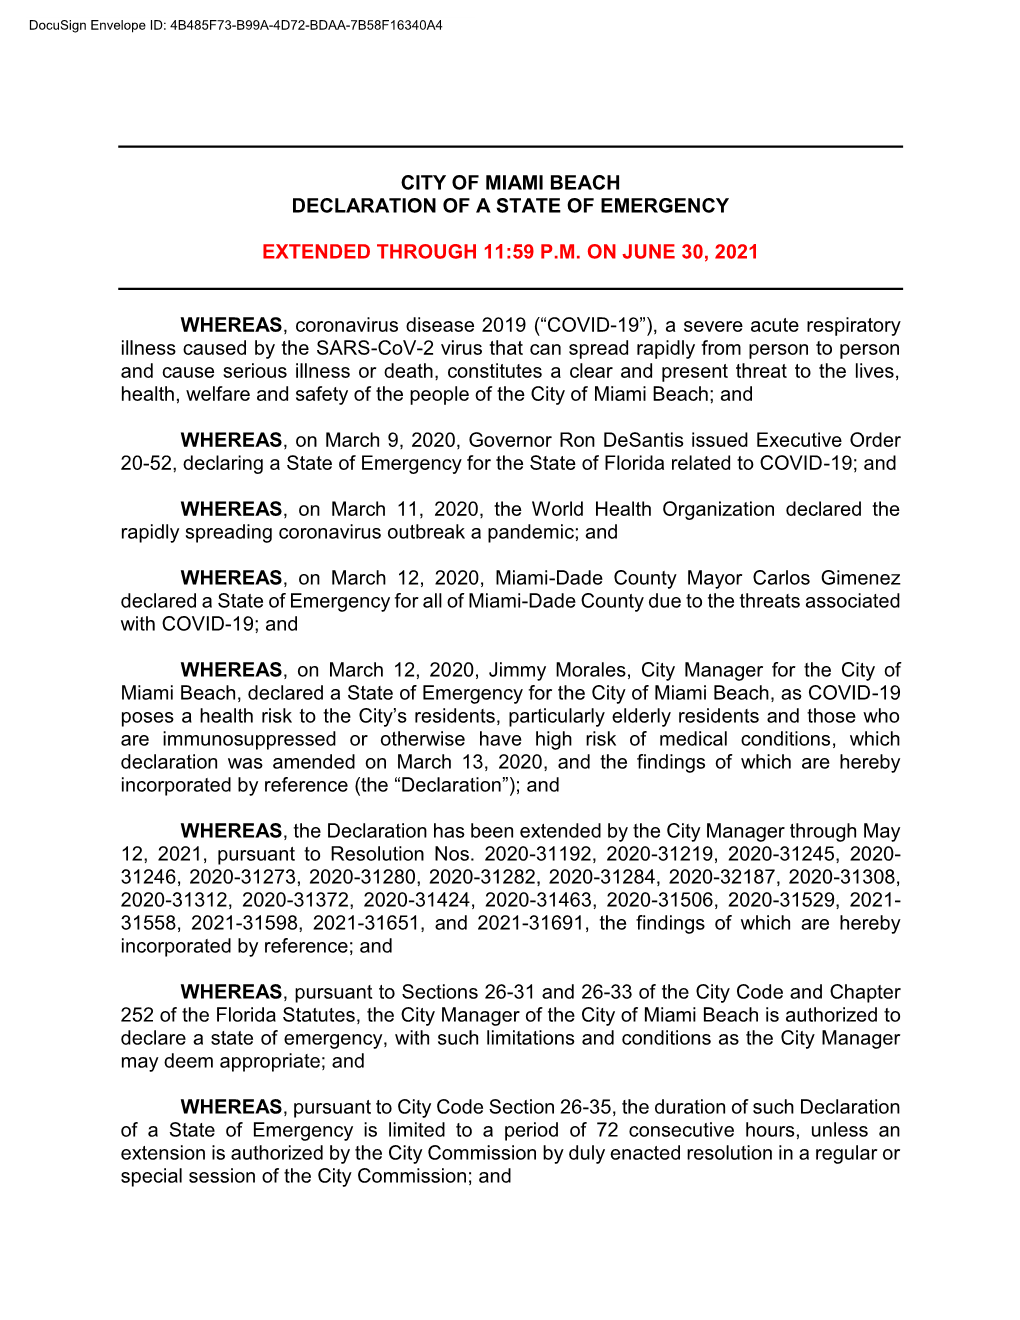 City of Miami Beach Declaration of a State of Emergency